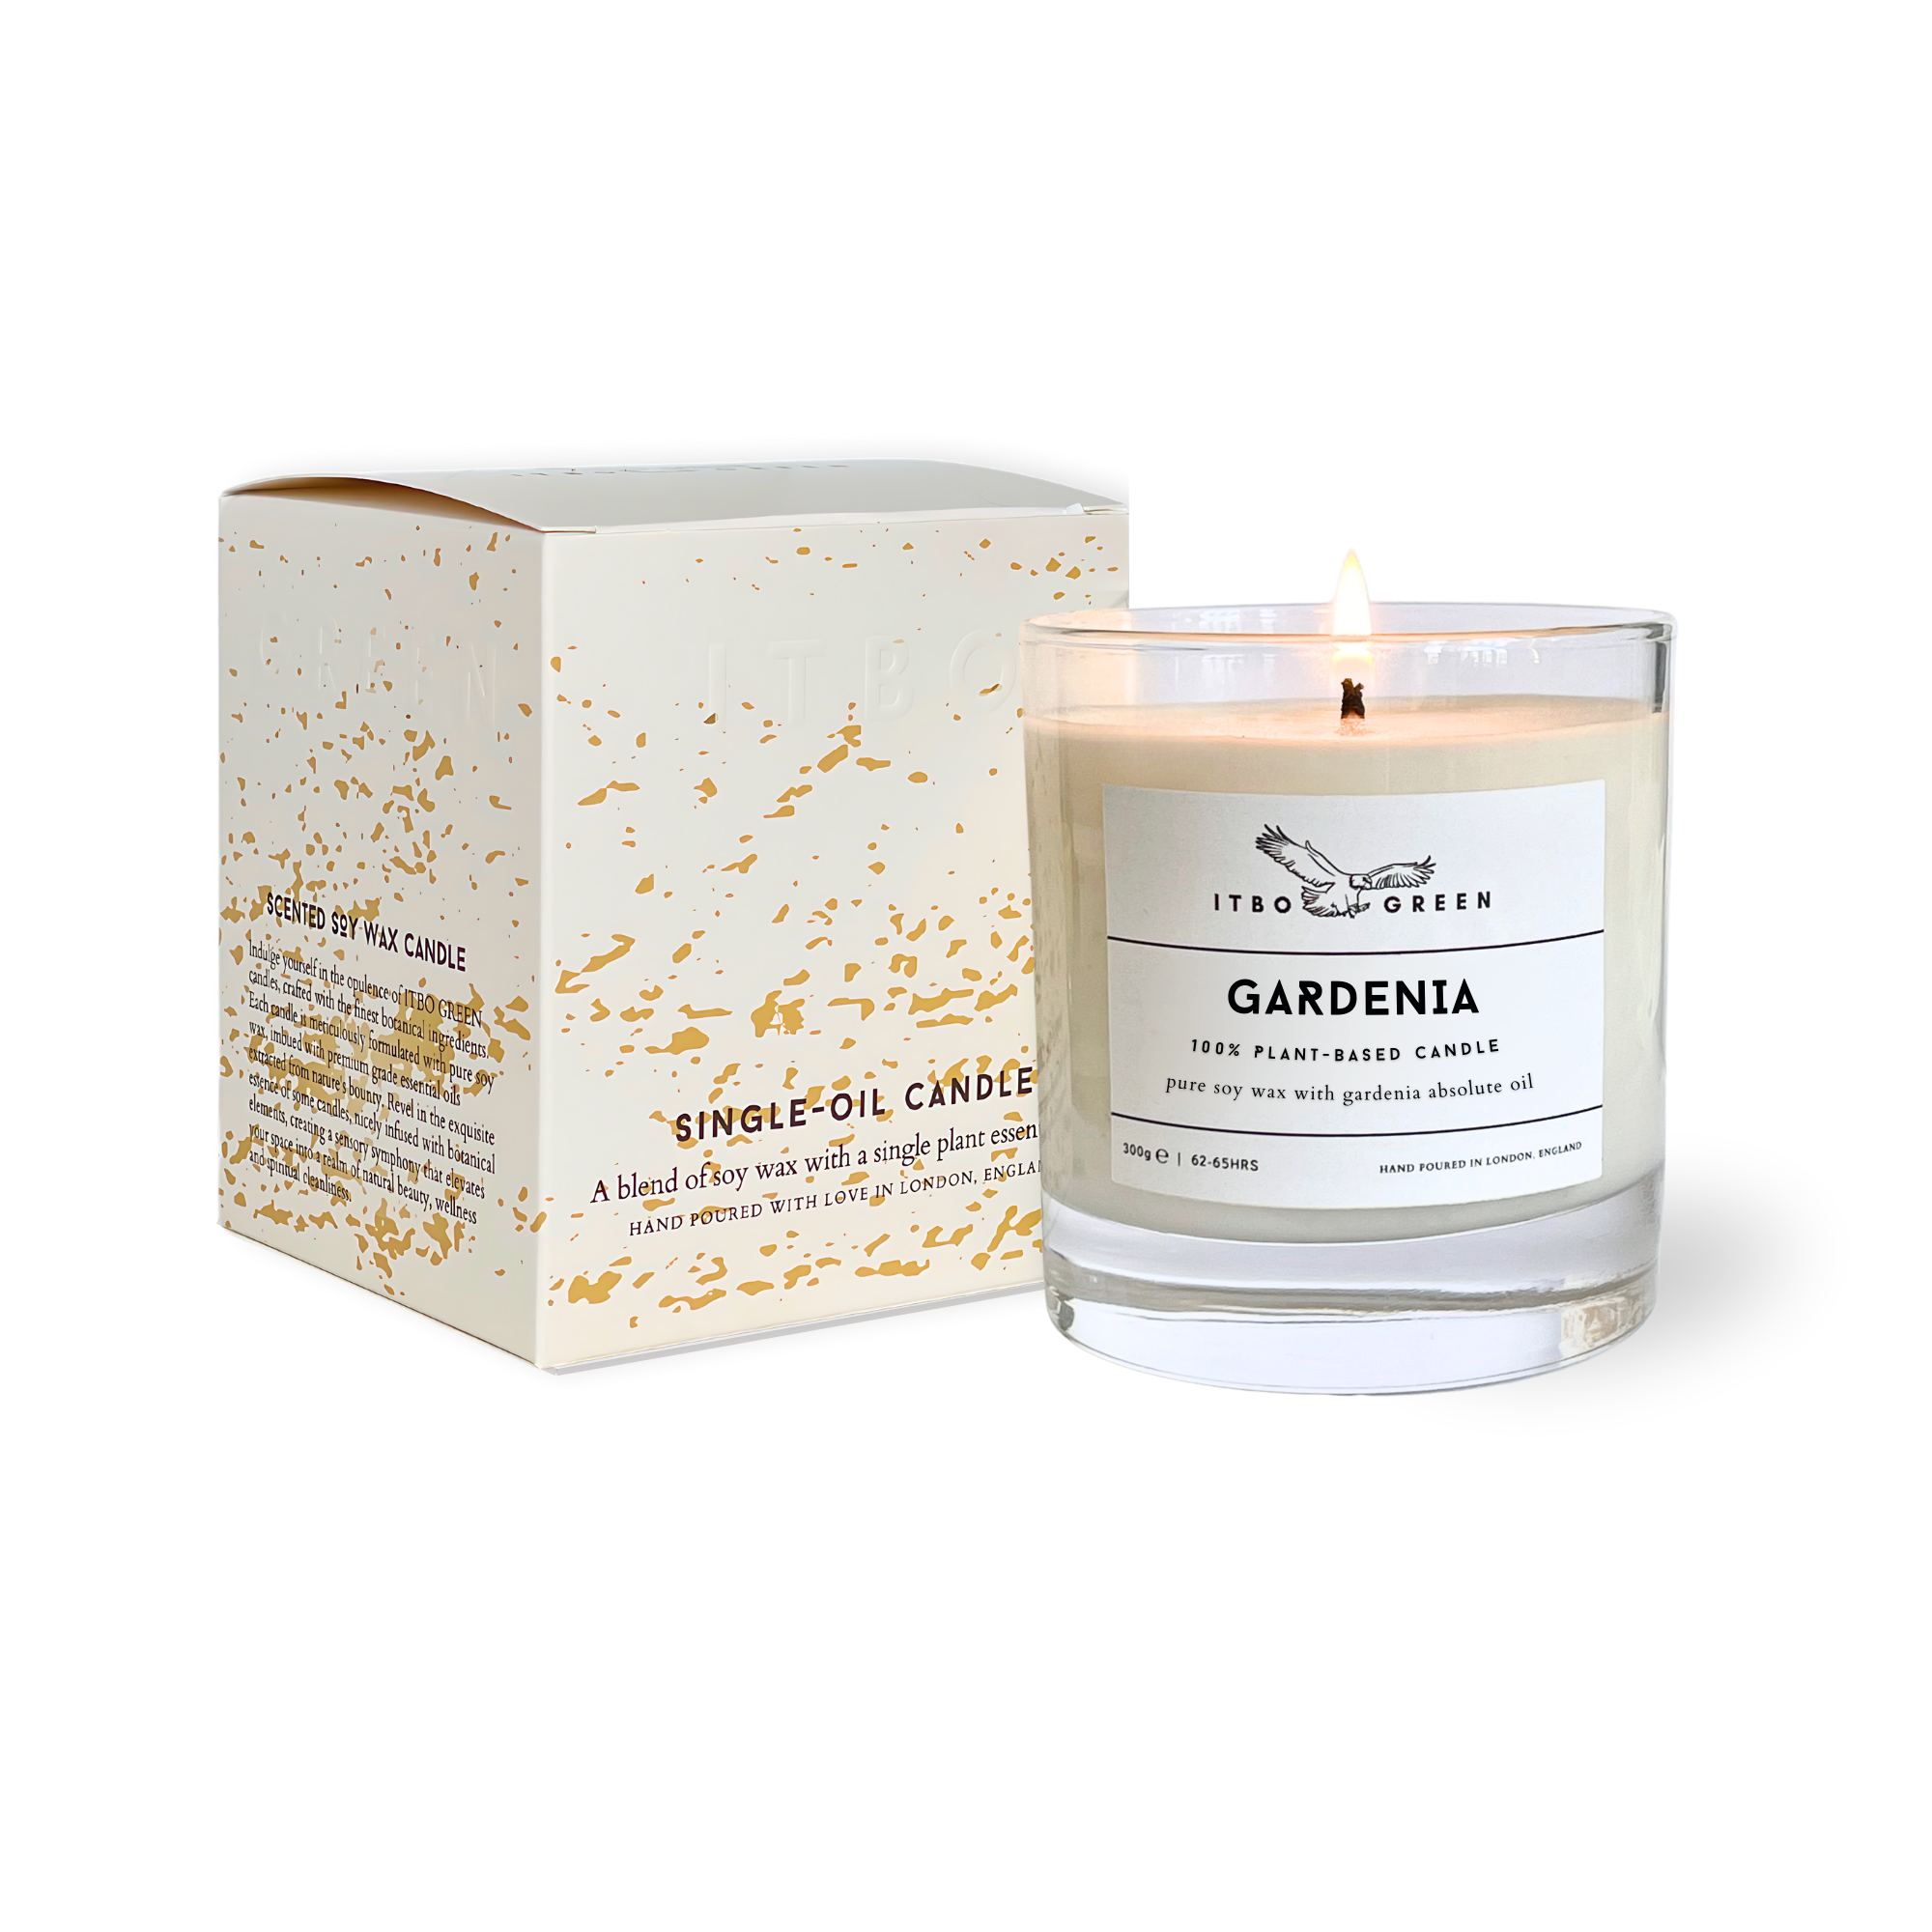 Gardenia Absolute Oil Candle